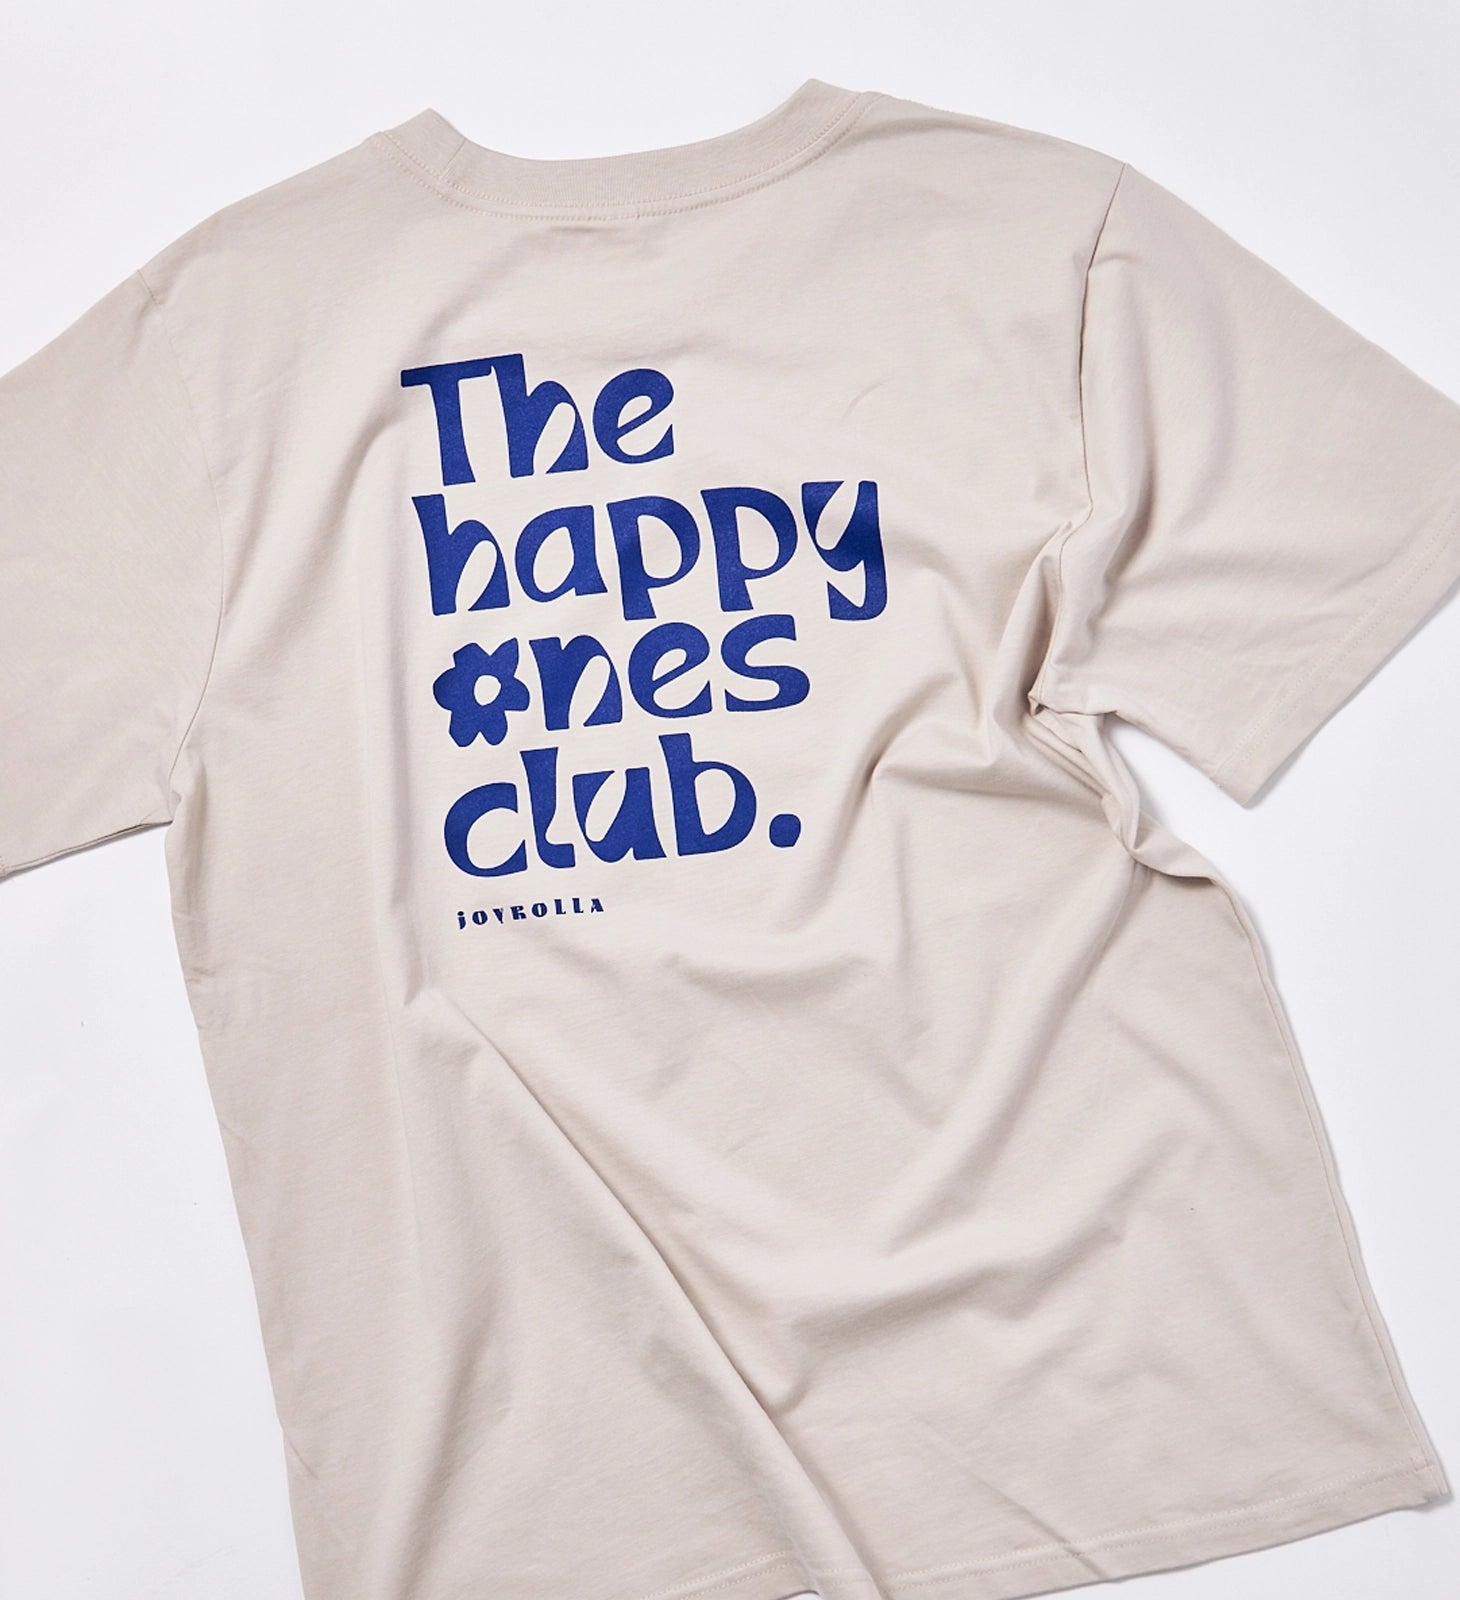 The Happy Ones T-shirt - Blue - Sample Sale